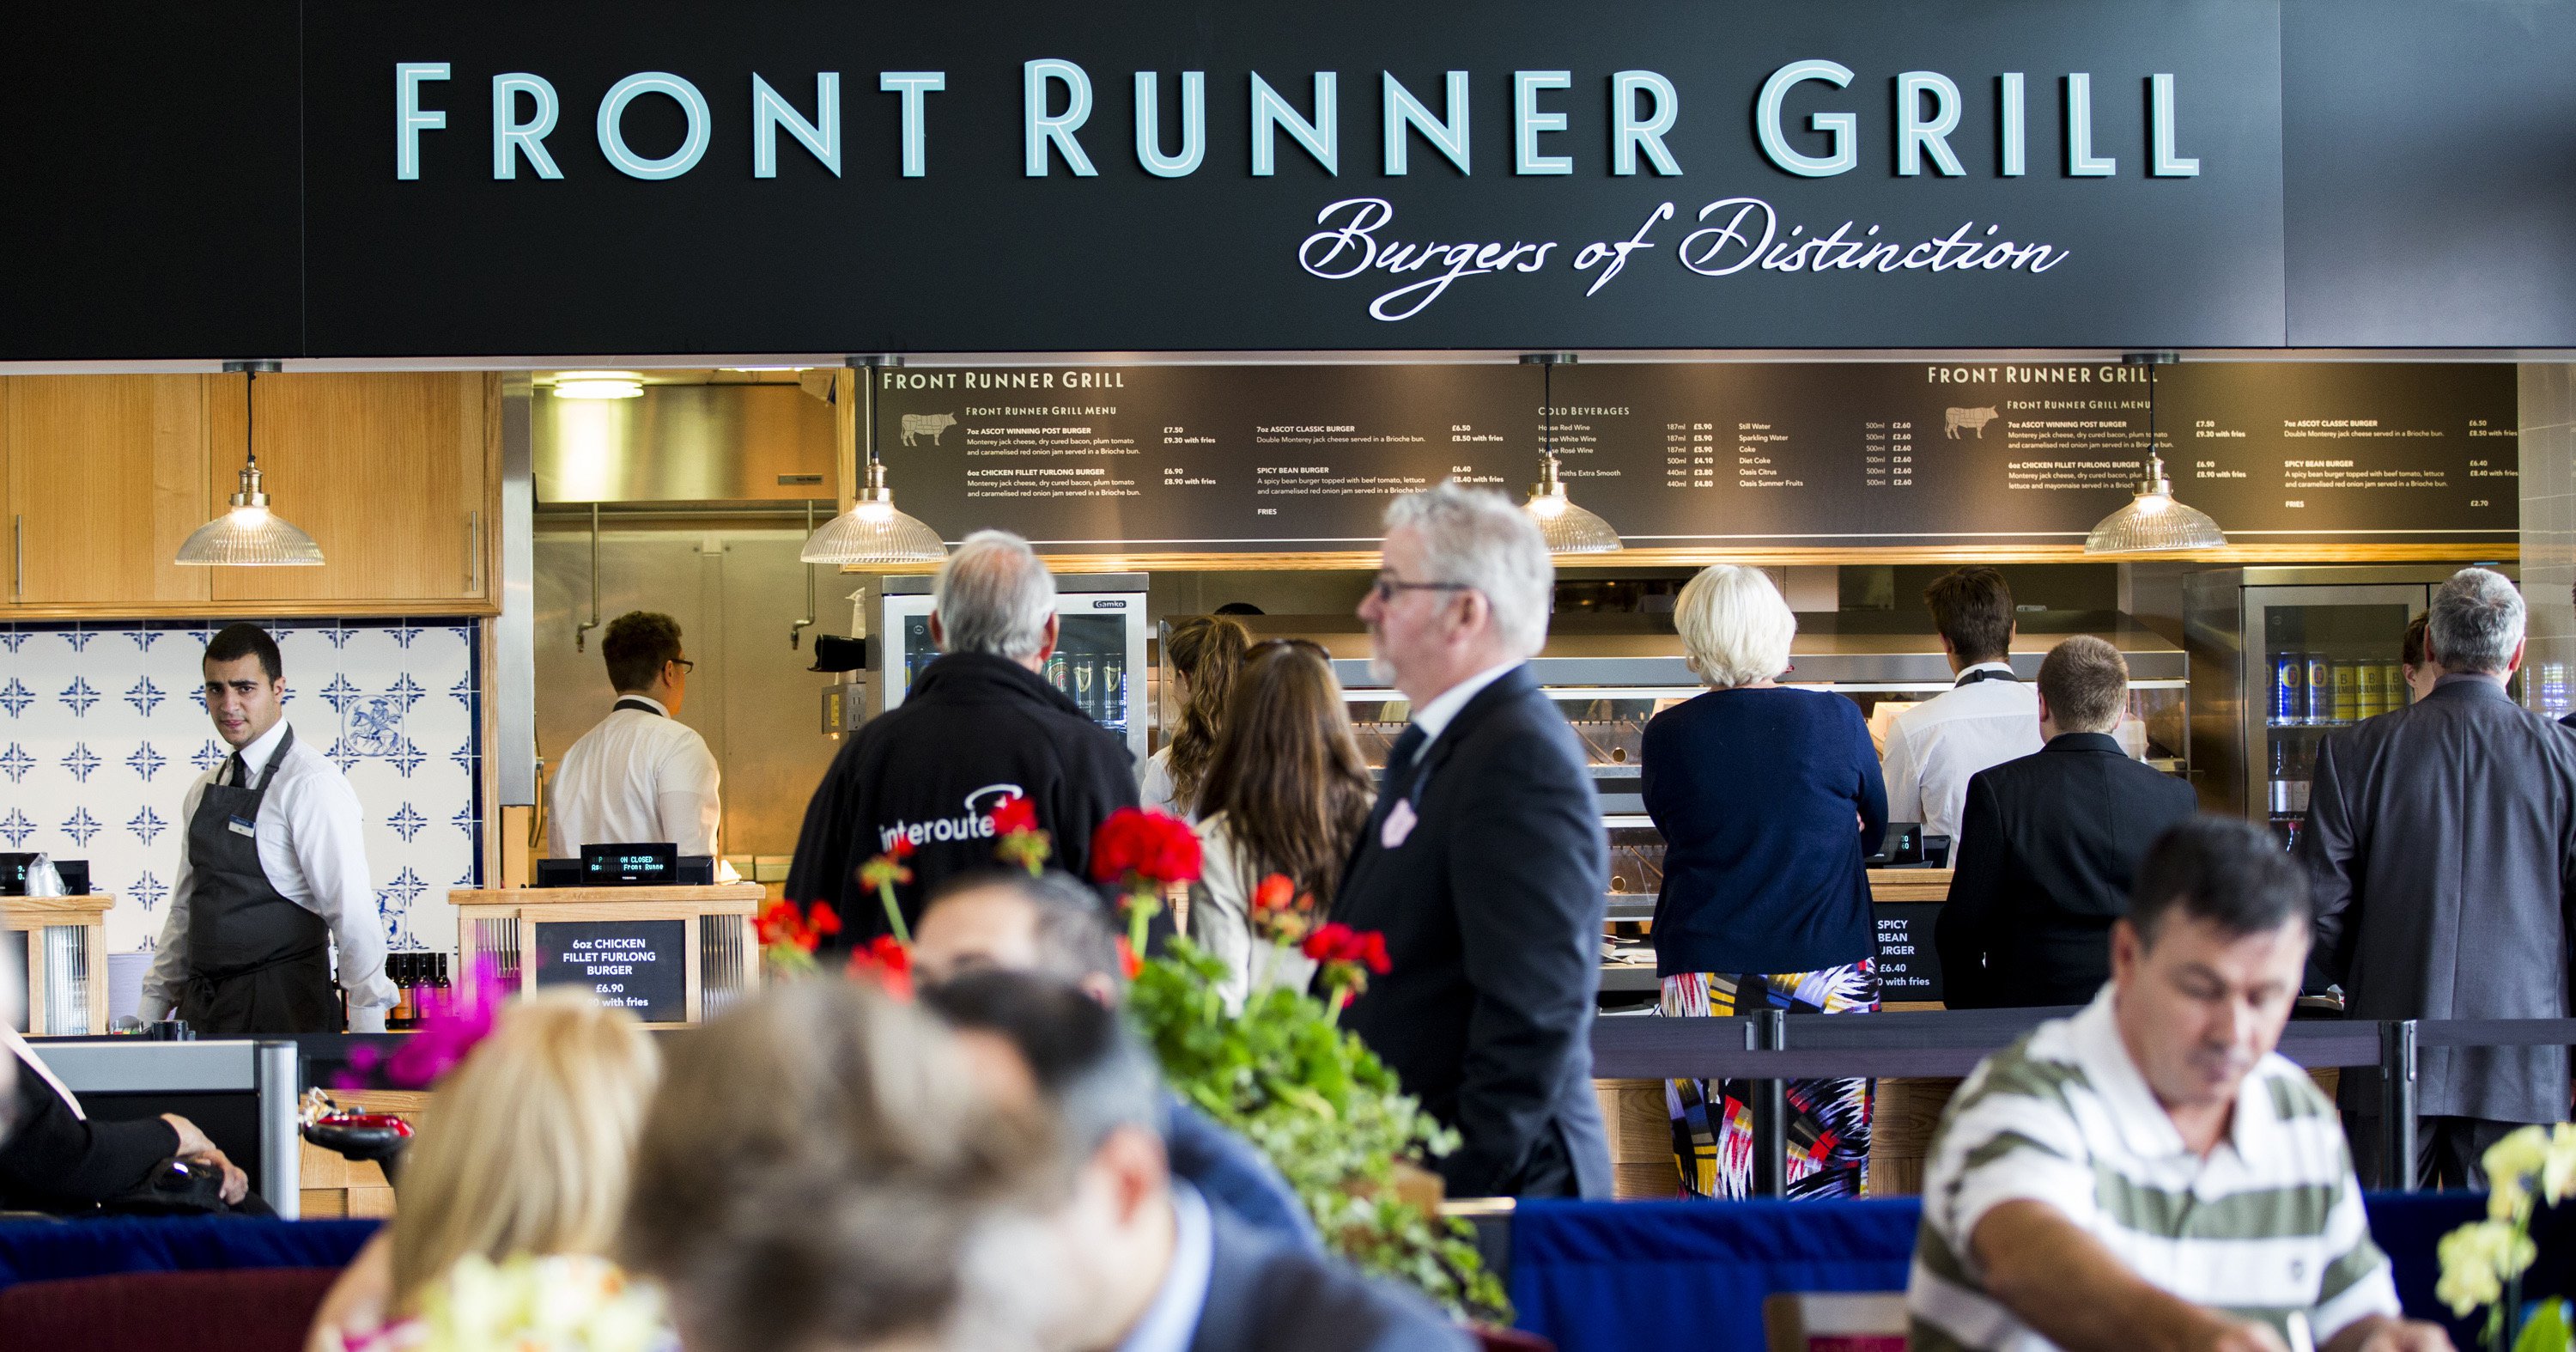 Brandy Theseus atlet Ascot Food & Drink | Front Runner Grill | Ascot Racecourse